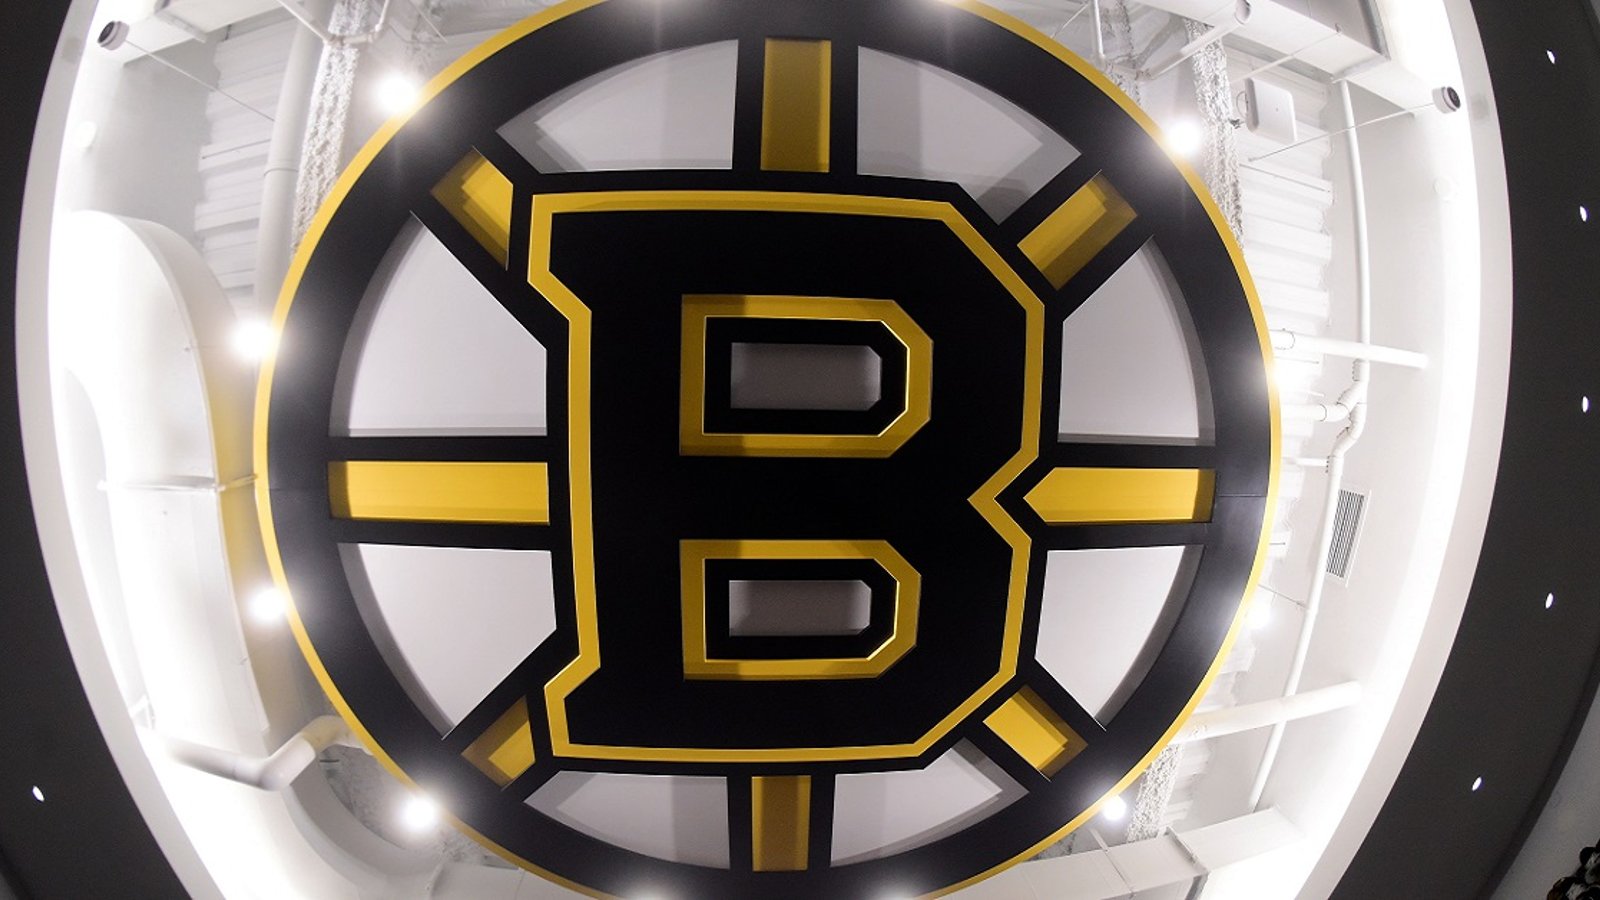 Boston Bruins 100th anniversary jerseys leaked early.